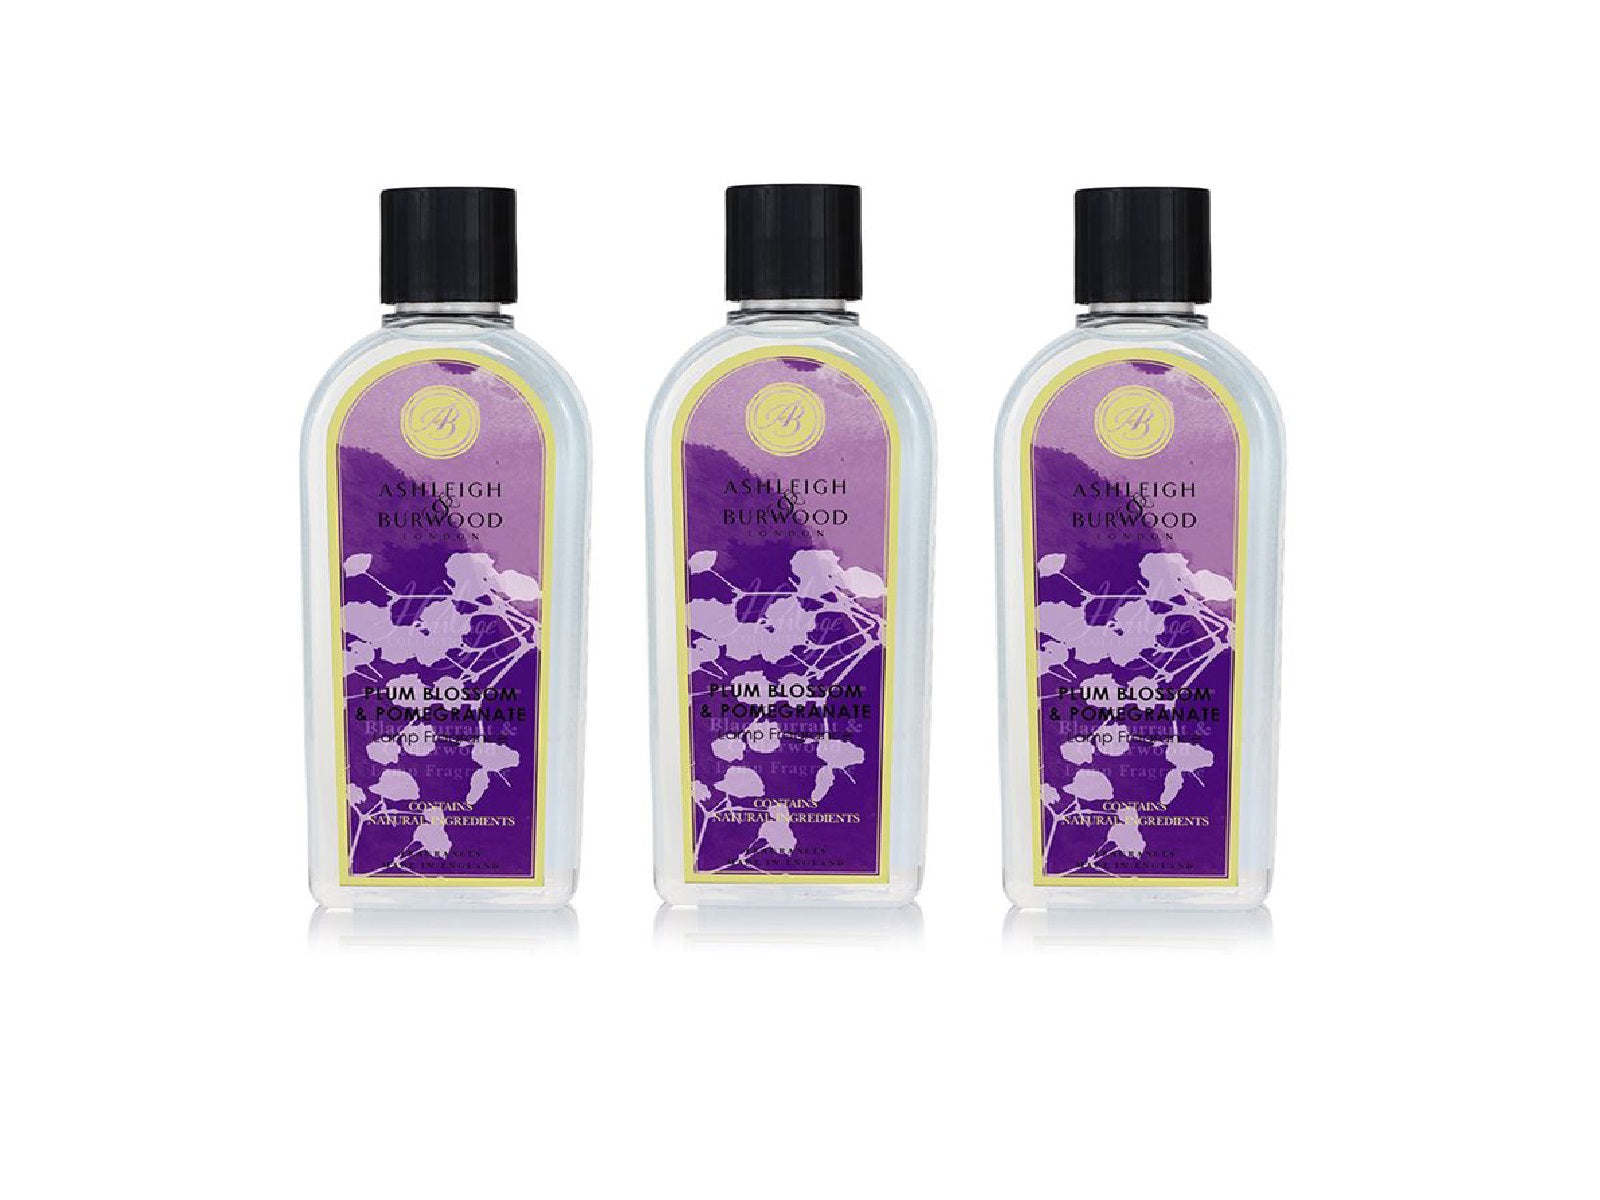 Three bottles of plum blossom and pomegranate scent with clear bottles, floral purple labels and black caps